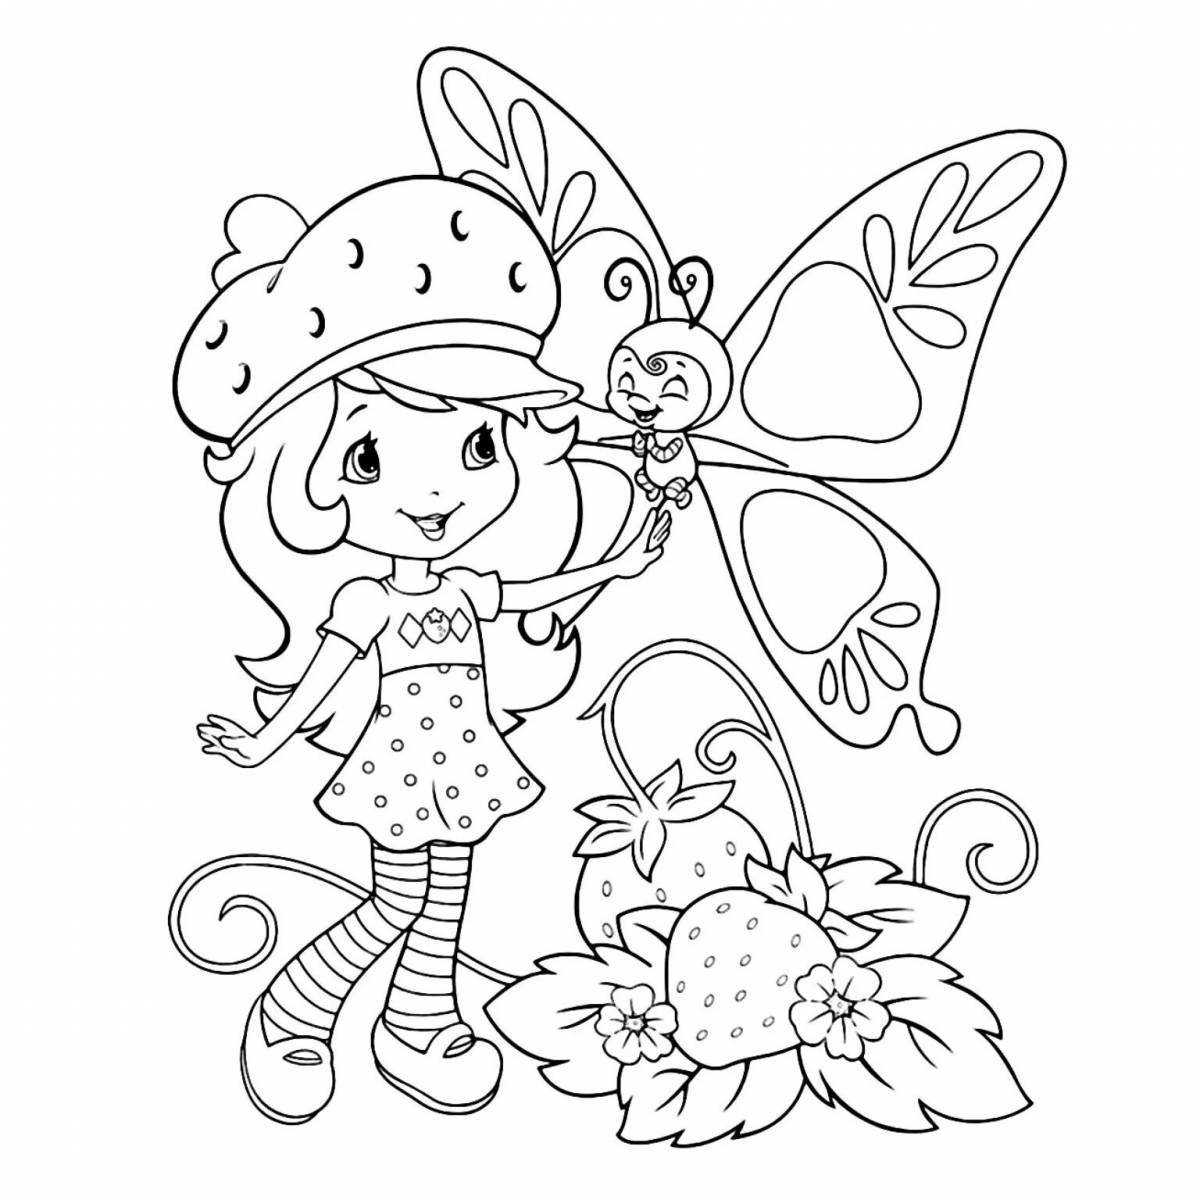 Fairytale coloring book for girls full sheet